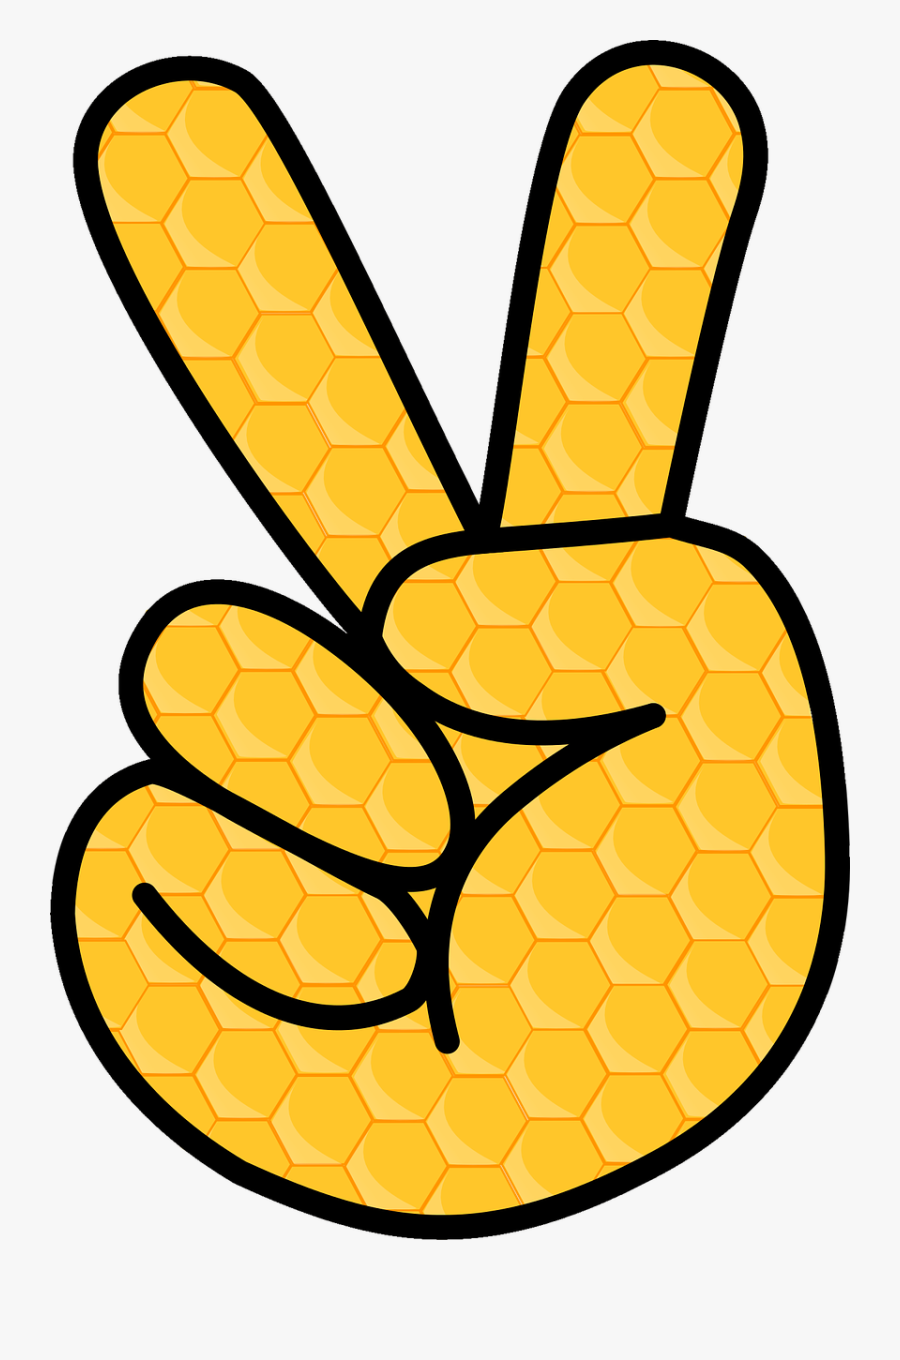 Fingers, Captured, Polygons, Peace, Diapers, All Good - Finger Cartoon Peace Sign, Transparent Clipart